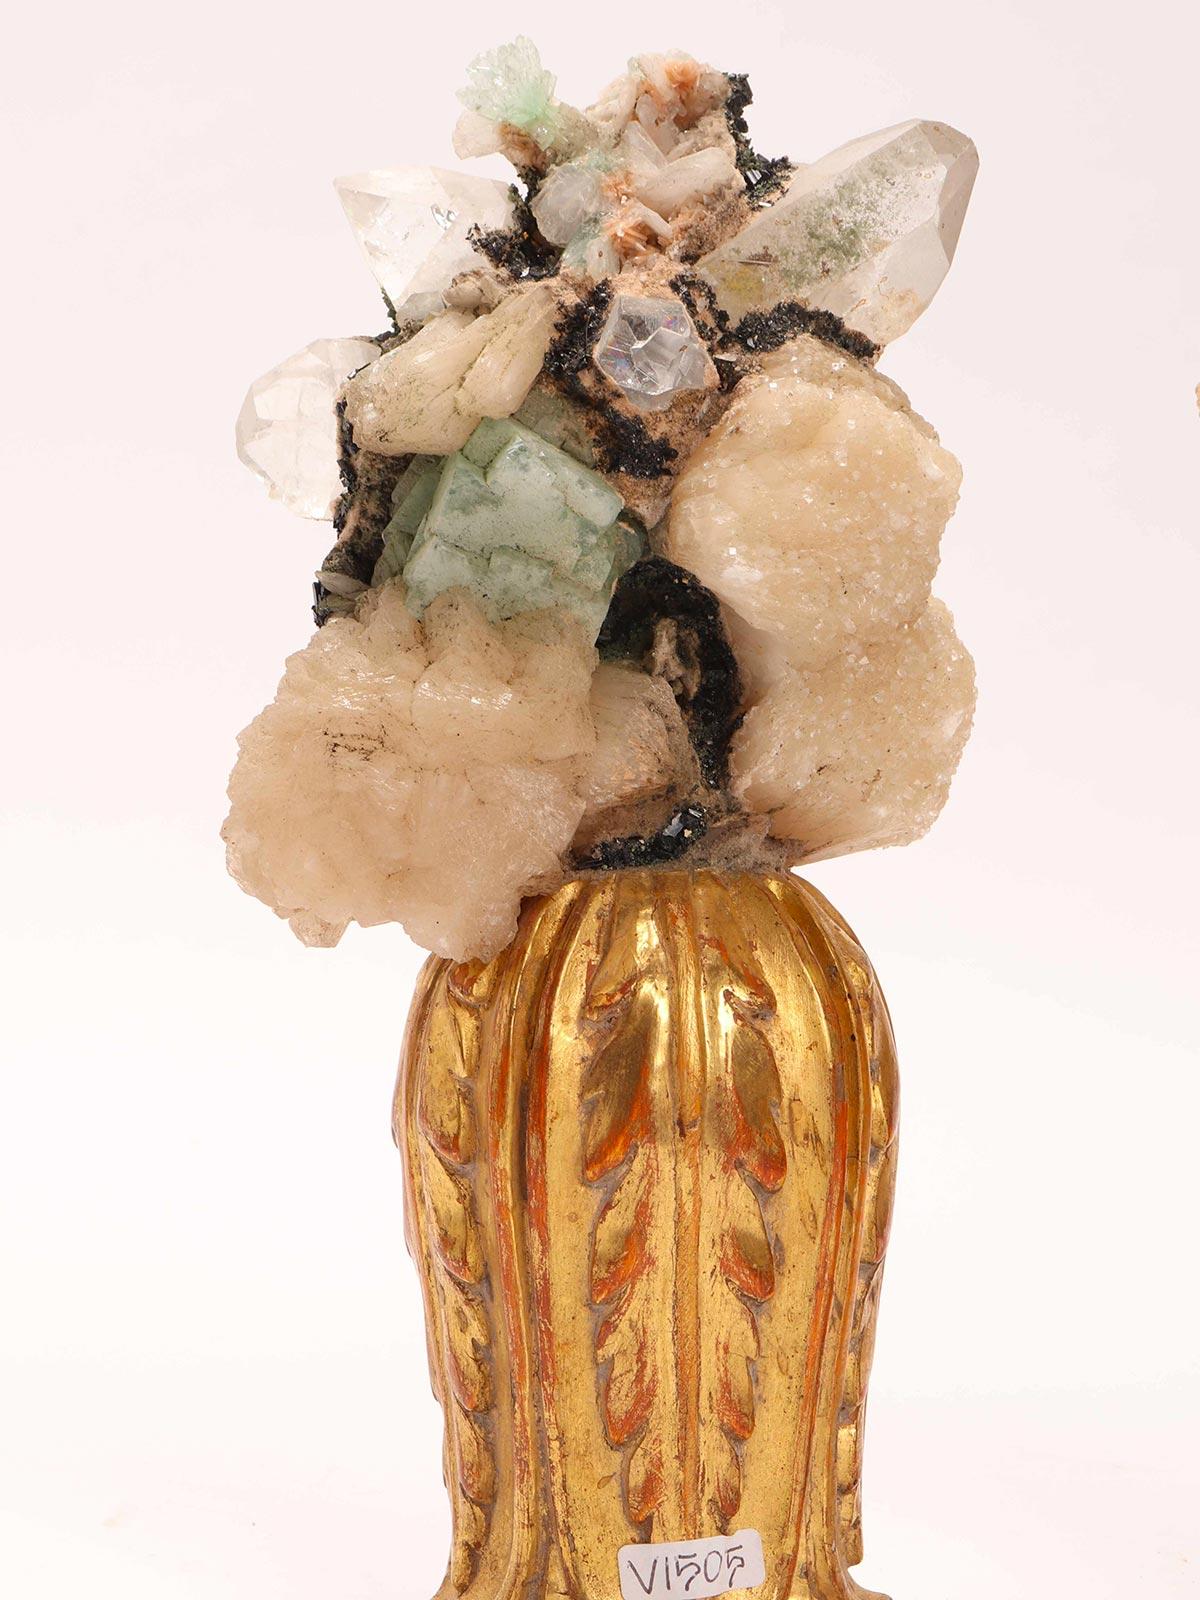 A natural mineral specimen. A pair of Apophyllite quartz Druzes mounted over a carved wooden base, vase shape with leaves gold gilt. Italy 1880 ca.